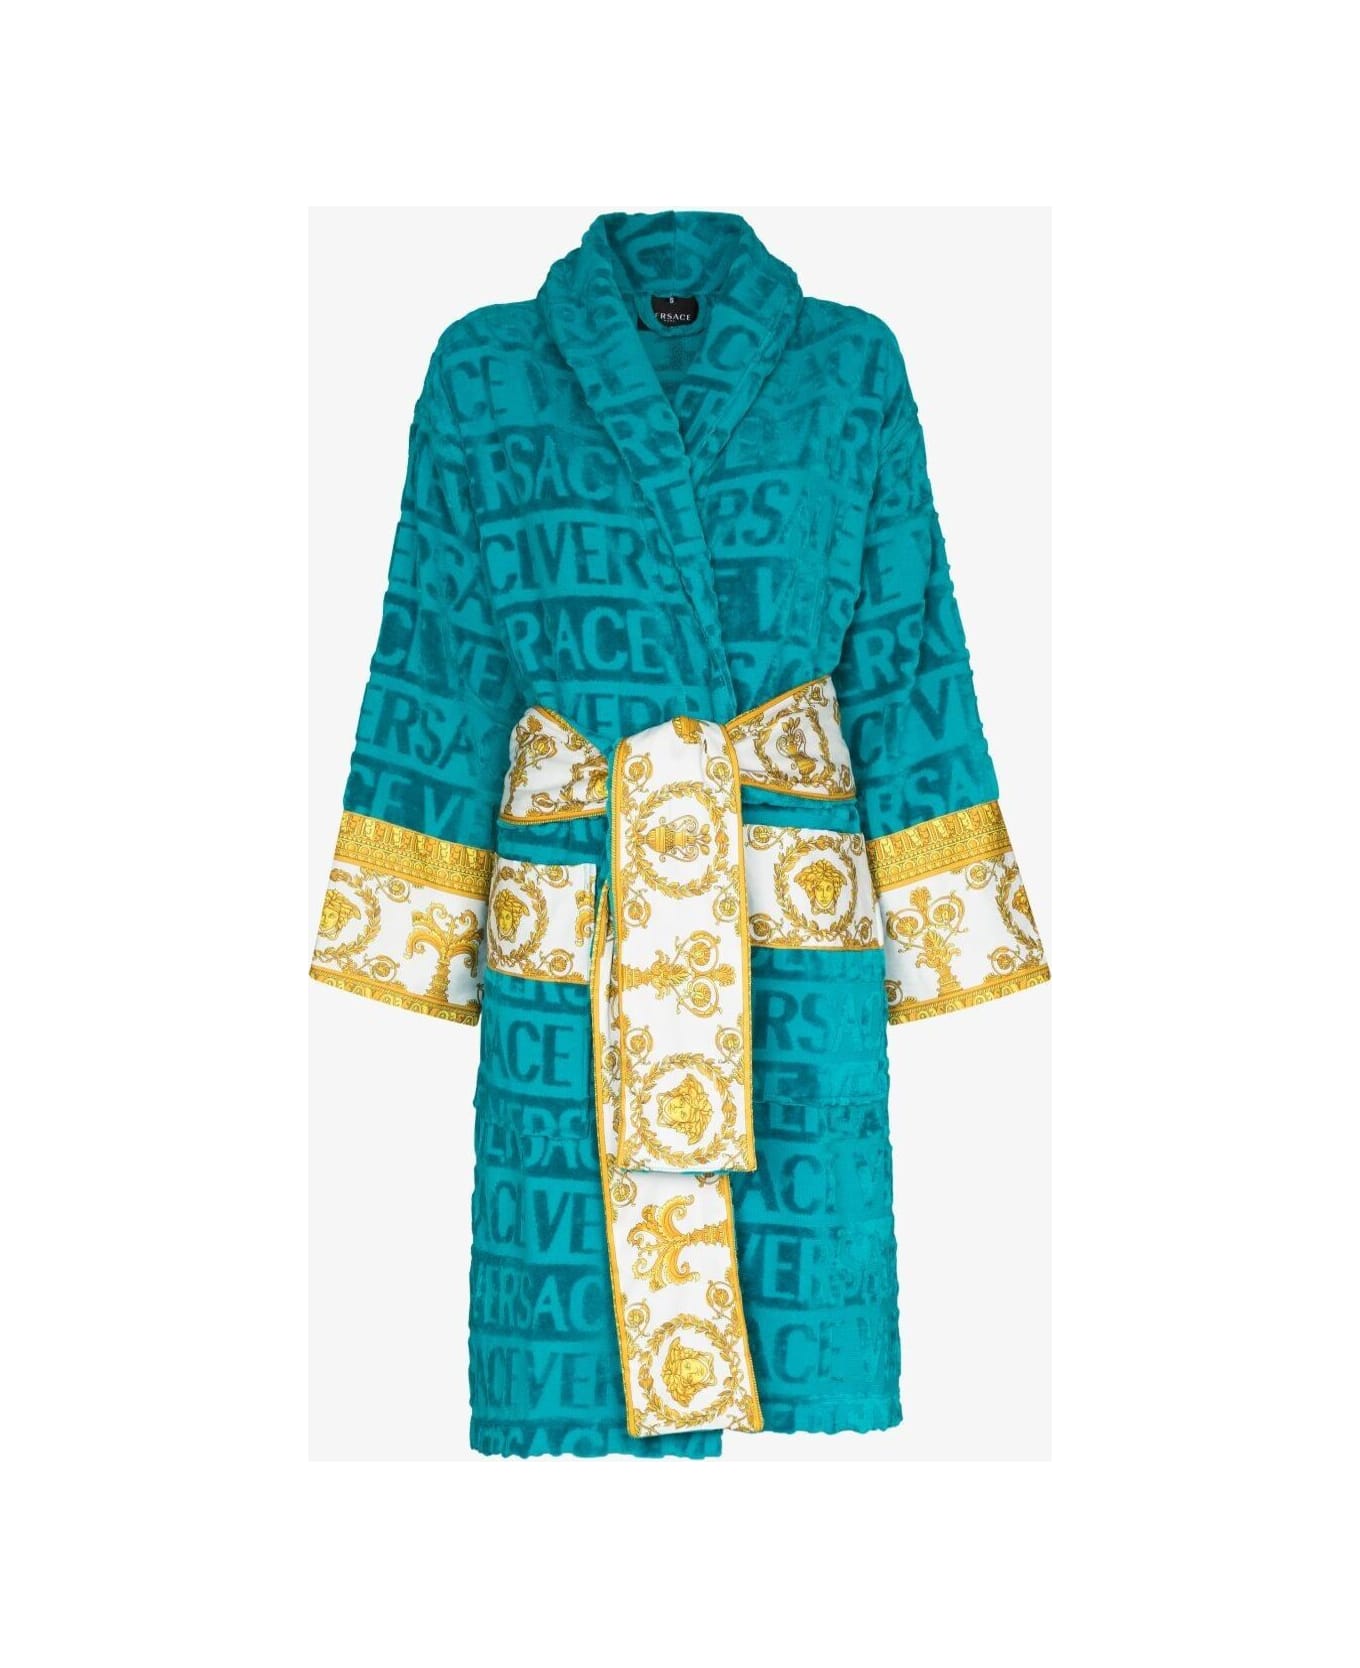 Versace Black Bathrobe With Baroque Pattern In Terry Cotton Versace Home - Black